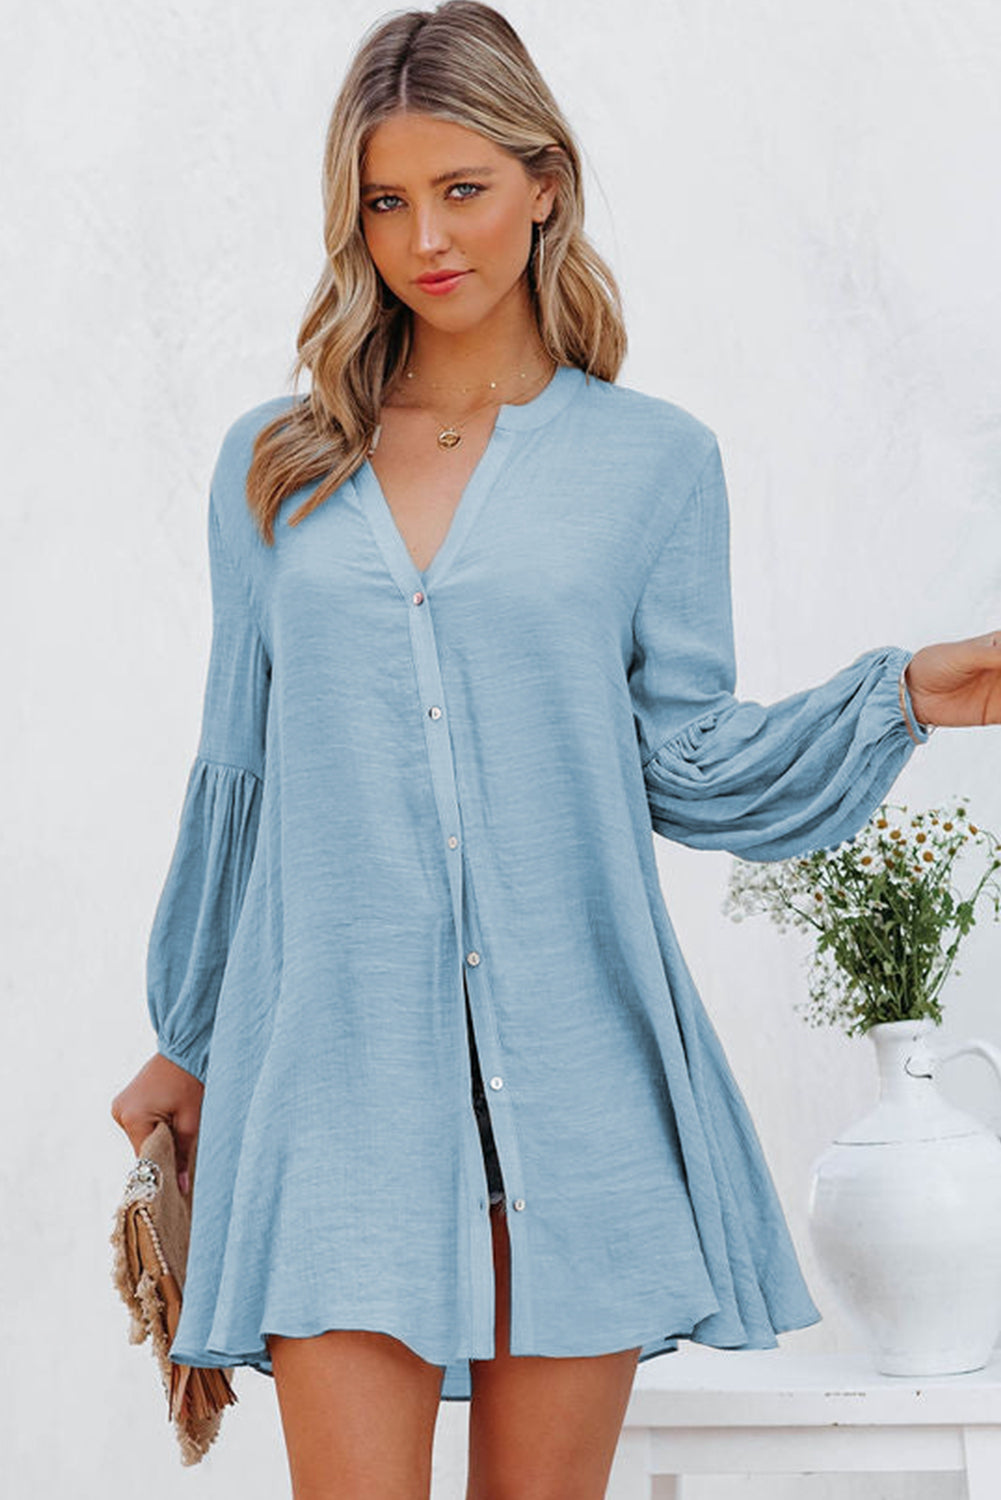 LC2552553-4-S, LC2552553-4-M, LC2552553-4-L, LC2552553-4-XL, LC2552553-4-2XL, Sky Blue Womens Long Sleeve Oversized Blouses Tops Button Up Bishop Sleeve Shirt